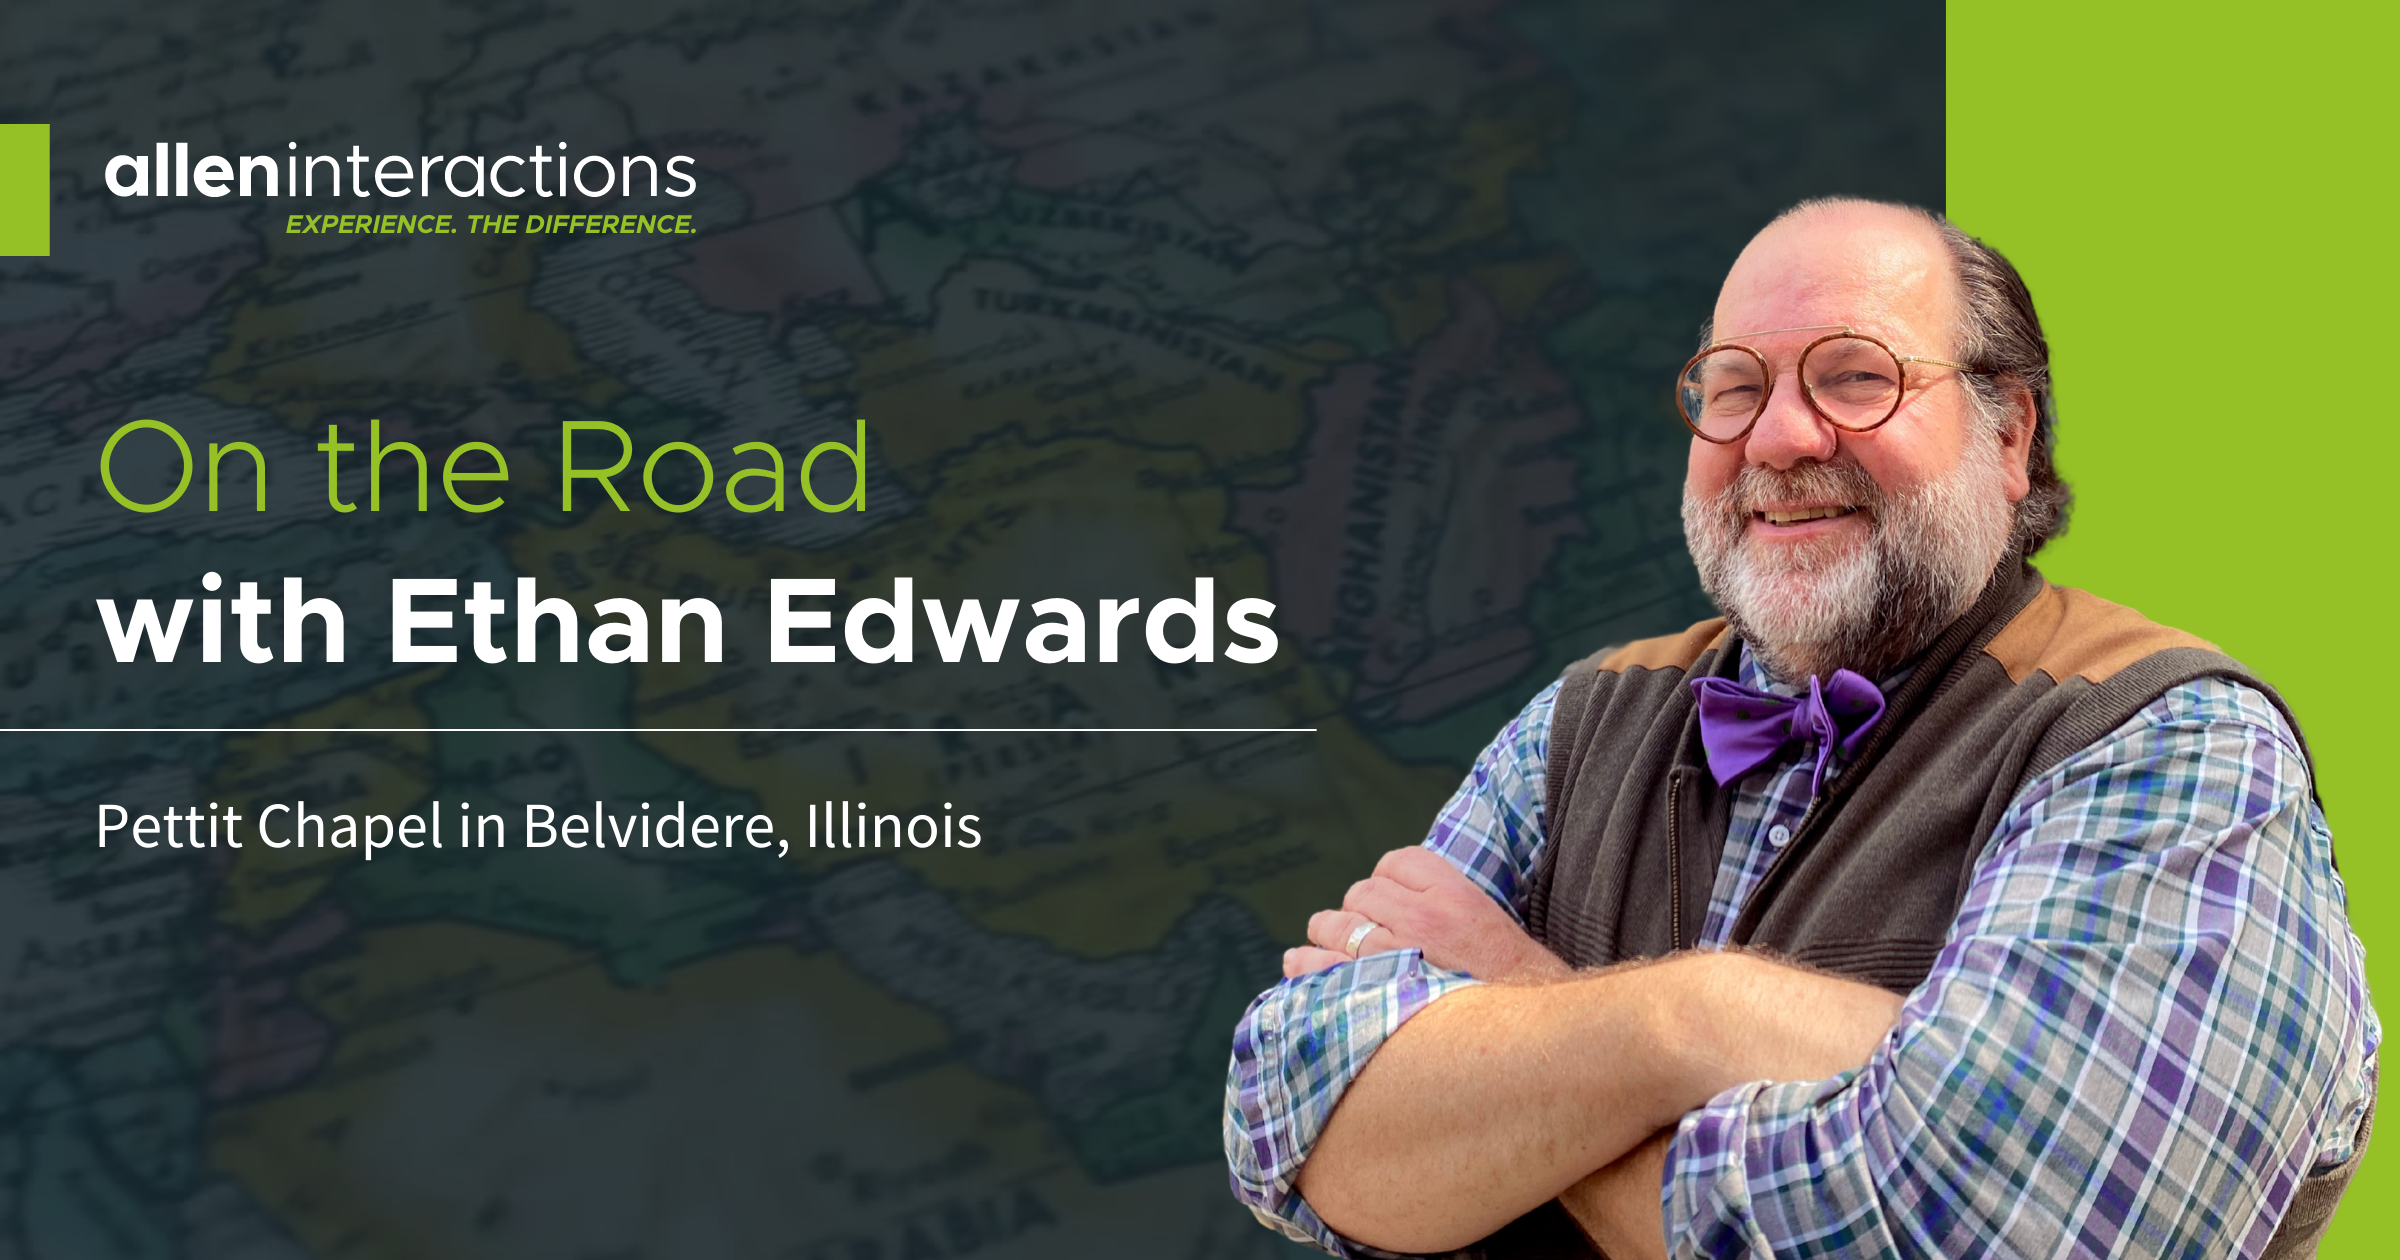 On the Road with Ethan Edwards: Pettit Chapel in Belvidere, Illinois